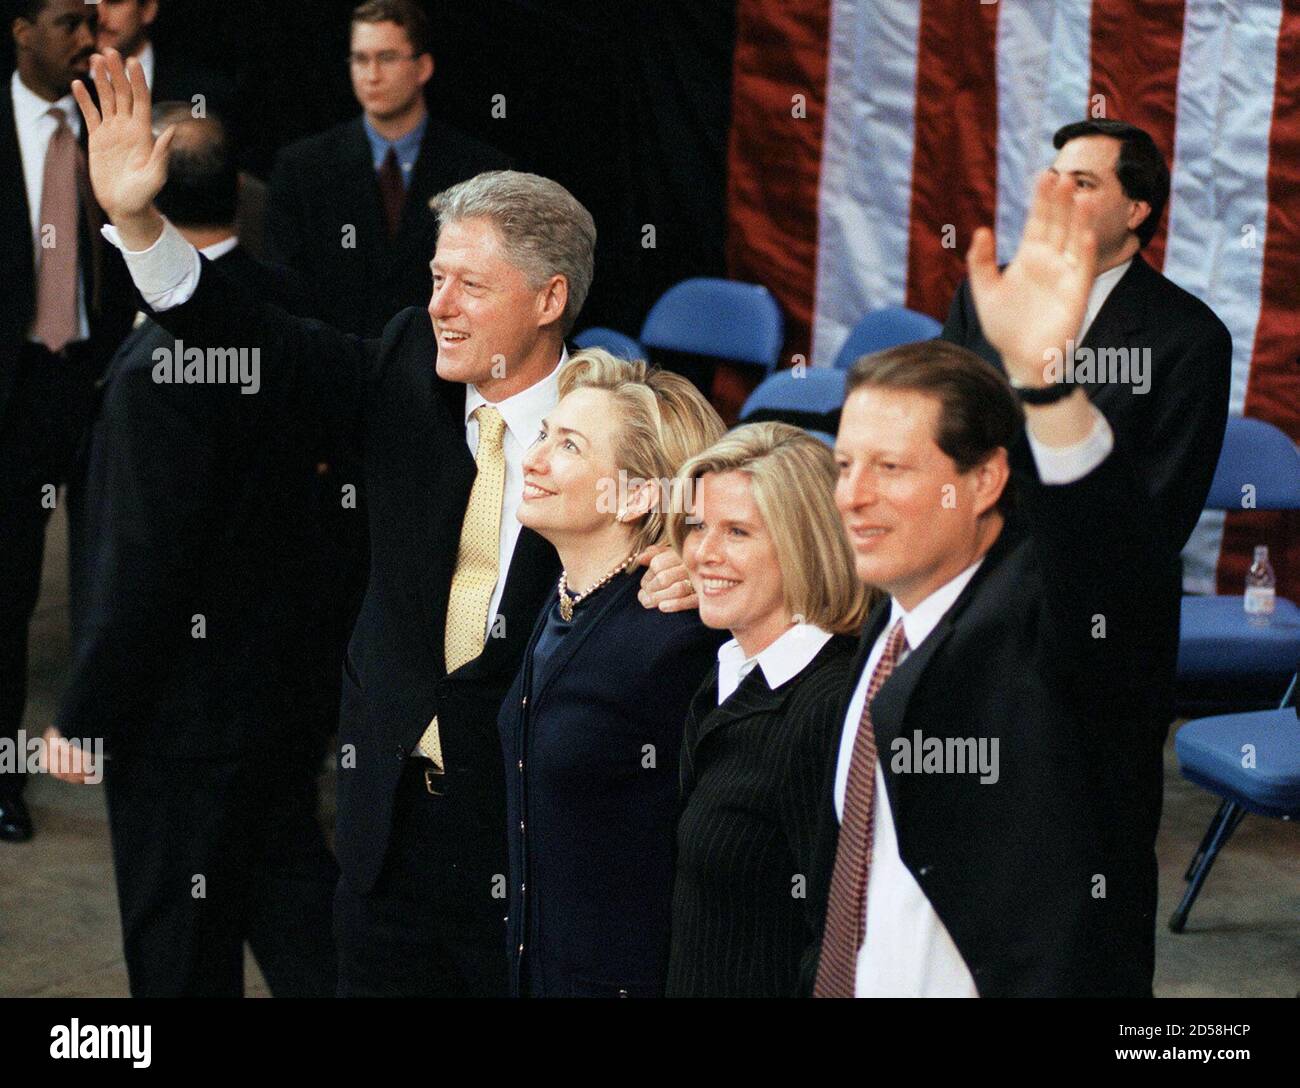 President Clinton, first lady Hillary Clinton, Vice President Gore and his  wife Tipper bid farewell to spectators in the upper seats of The Marine  Midland Arena in Buffalo, January 20. Clinton returned